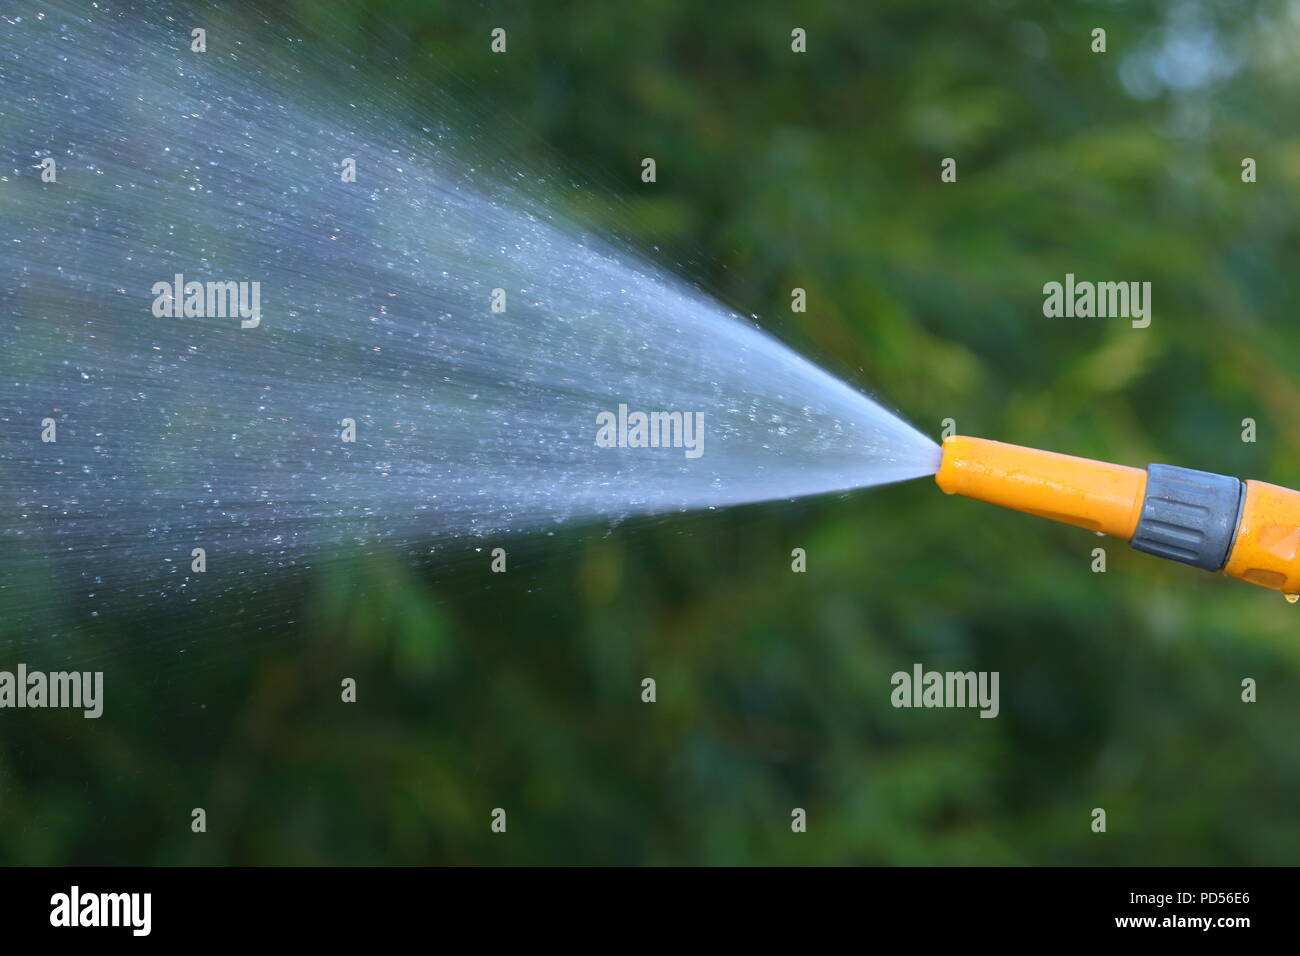 A water shower from a garden hosepipe Stock Photo